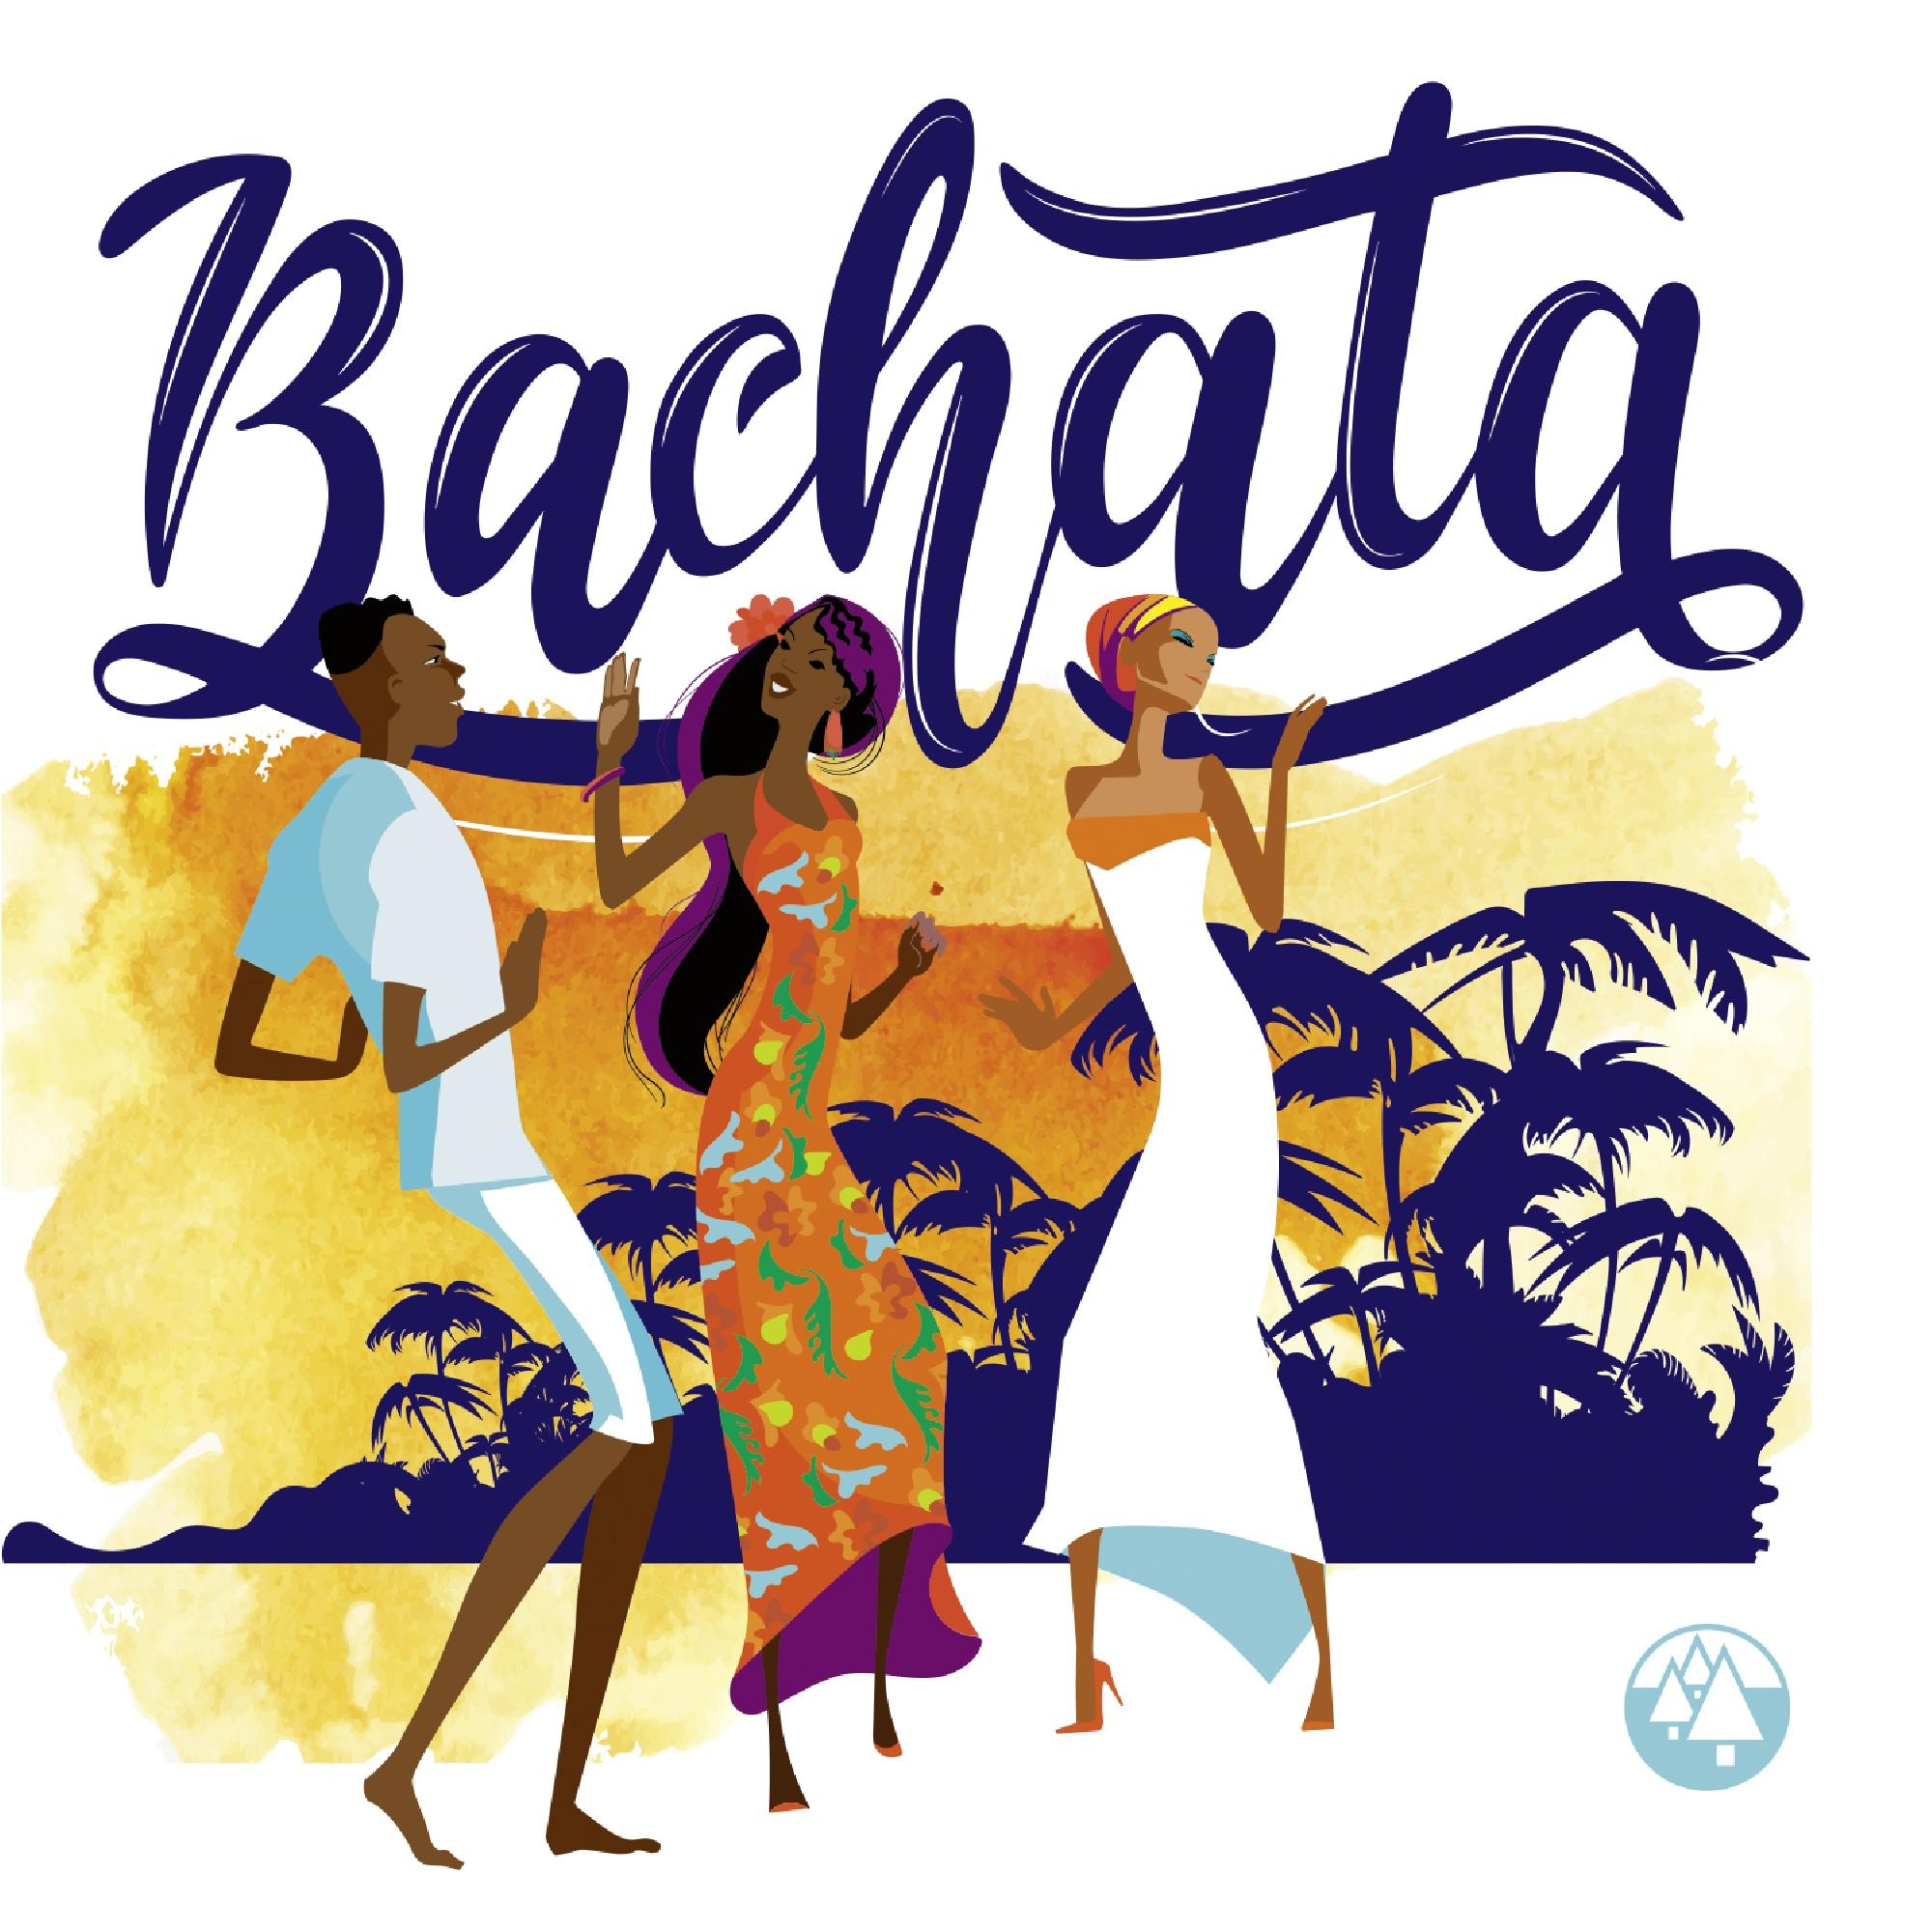 Bachata: A dance that was born of music in the Dominican Republic, Dance party. 2000x2000 HD Wallpaper.